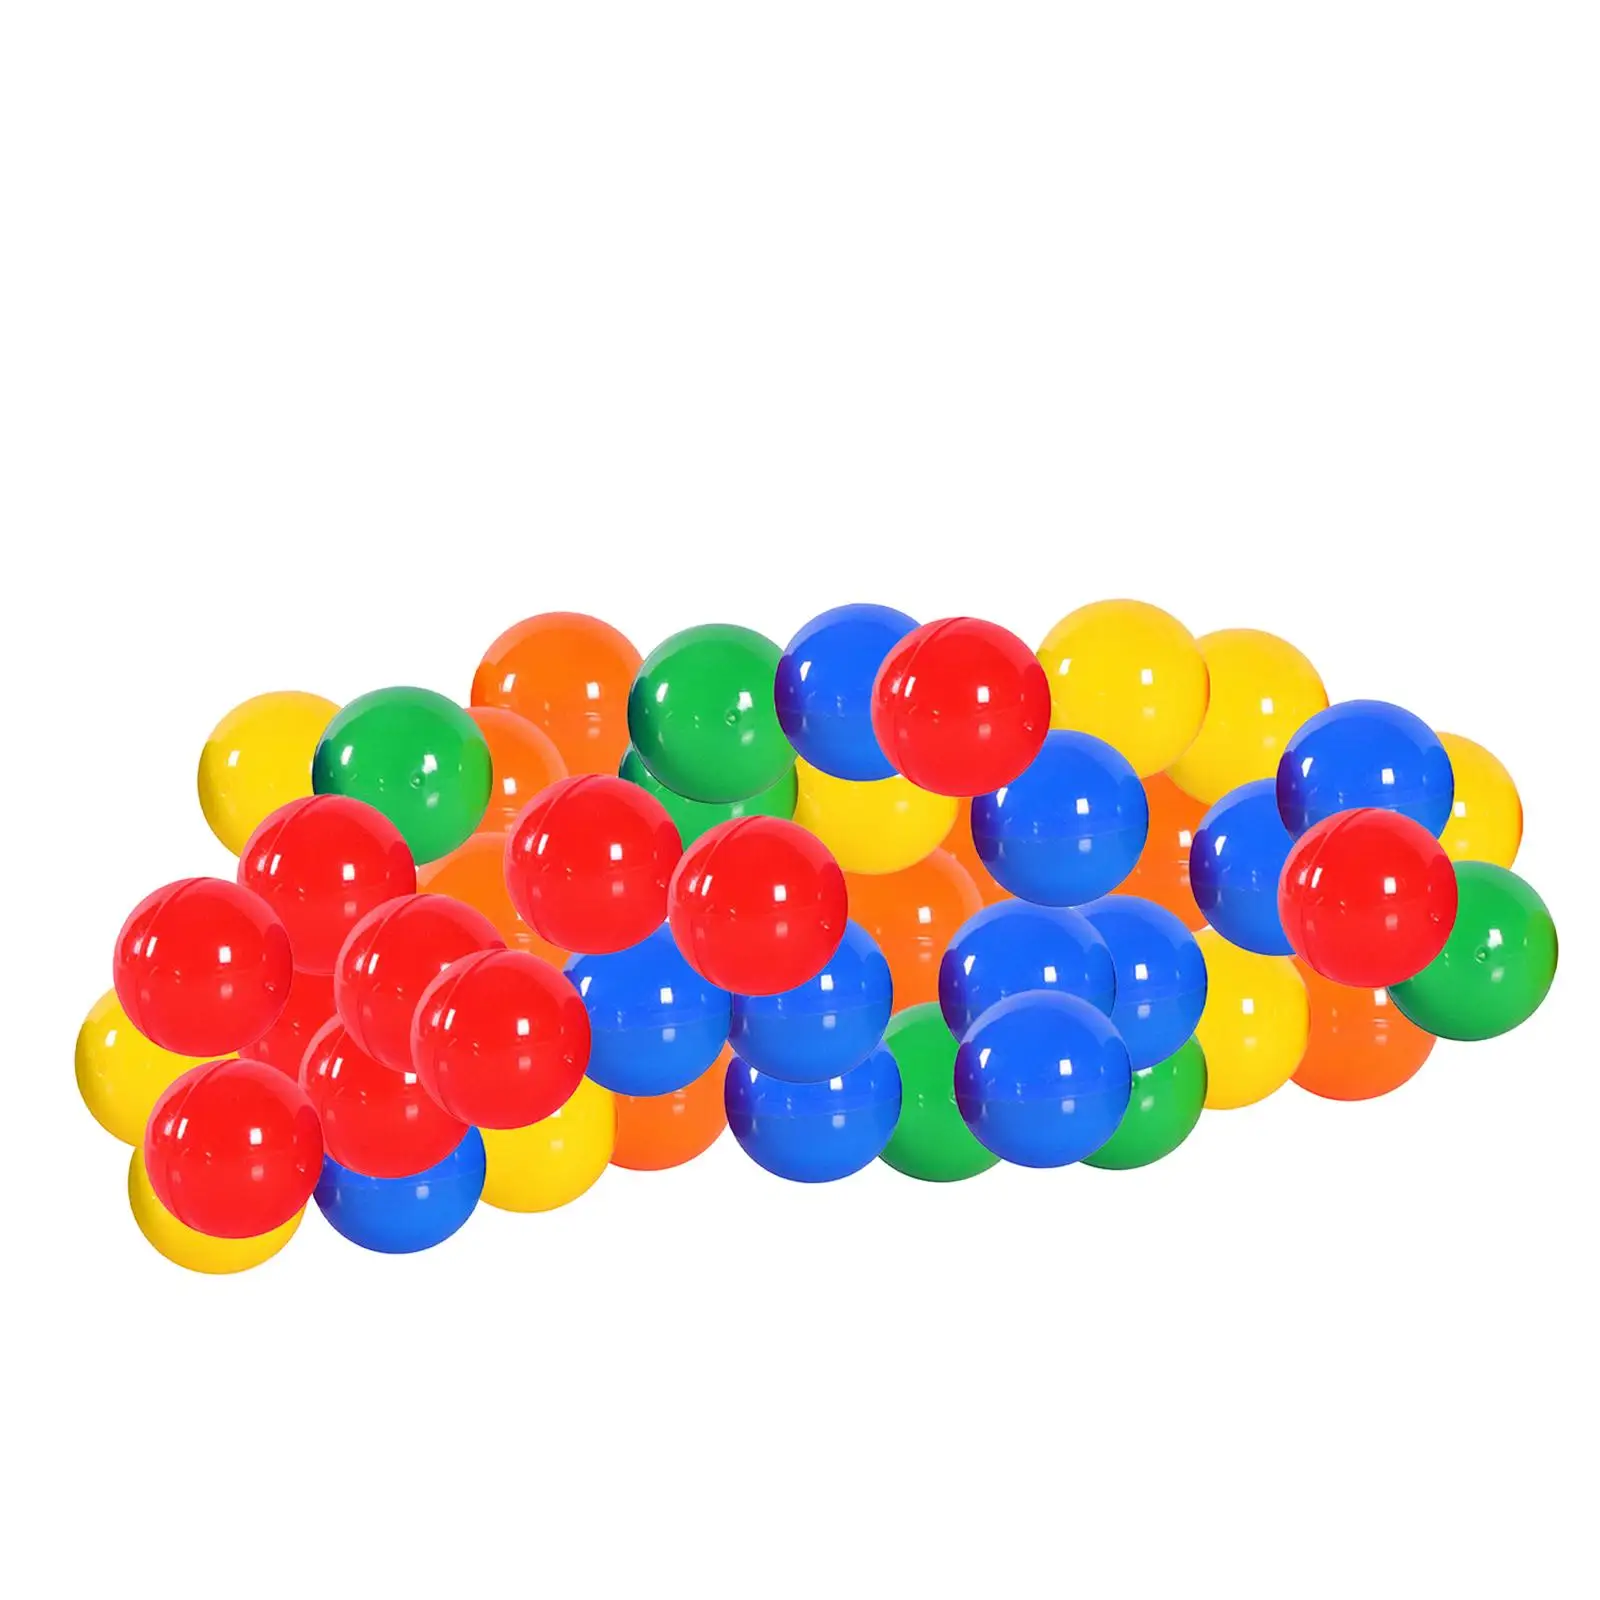 50 Pieces Bingo Ball Devices Lottery Balls for Parties Nights Traveling